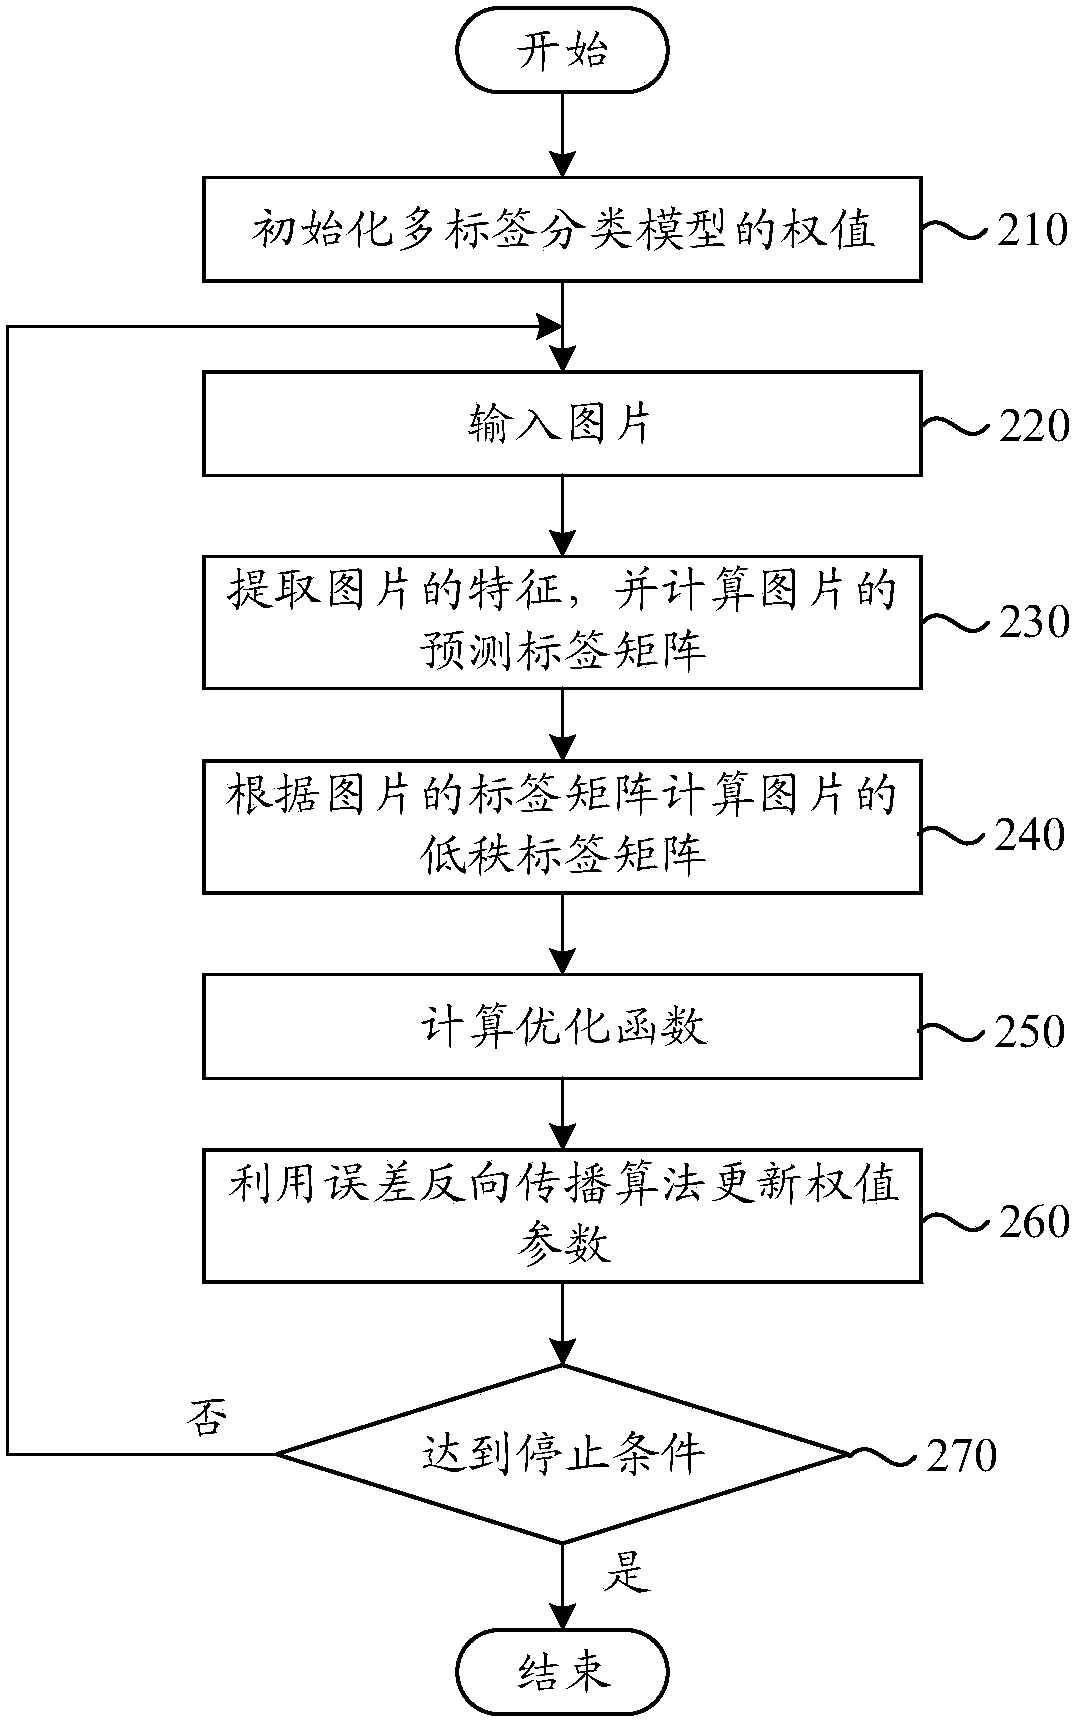 Method and device for training a multi-label classification model